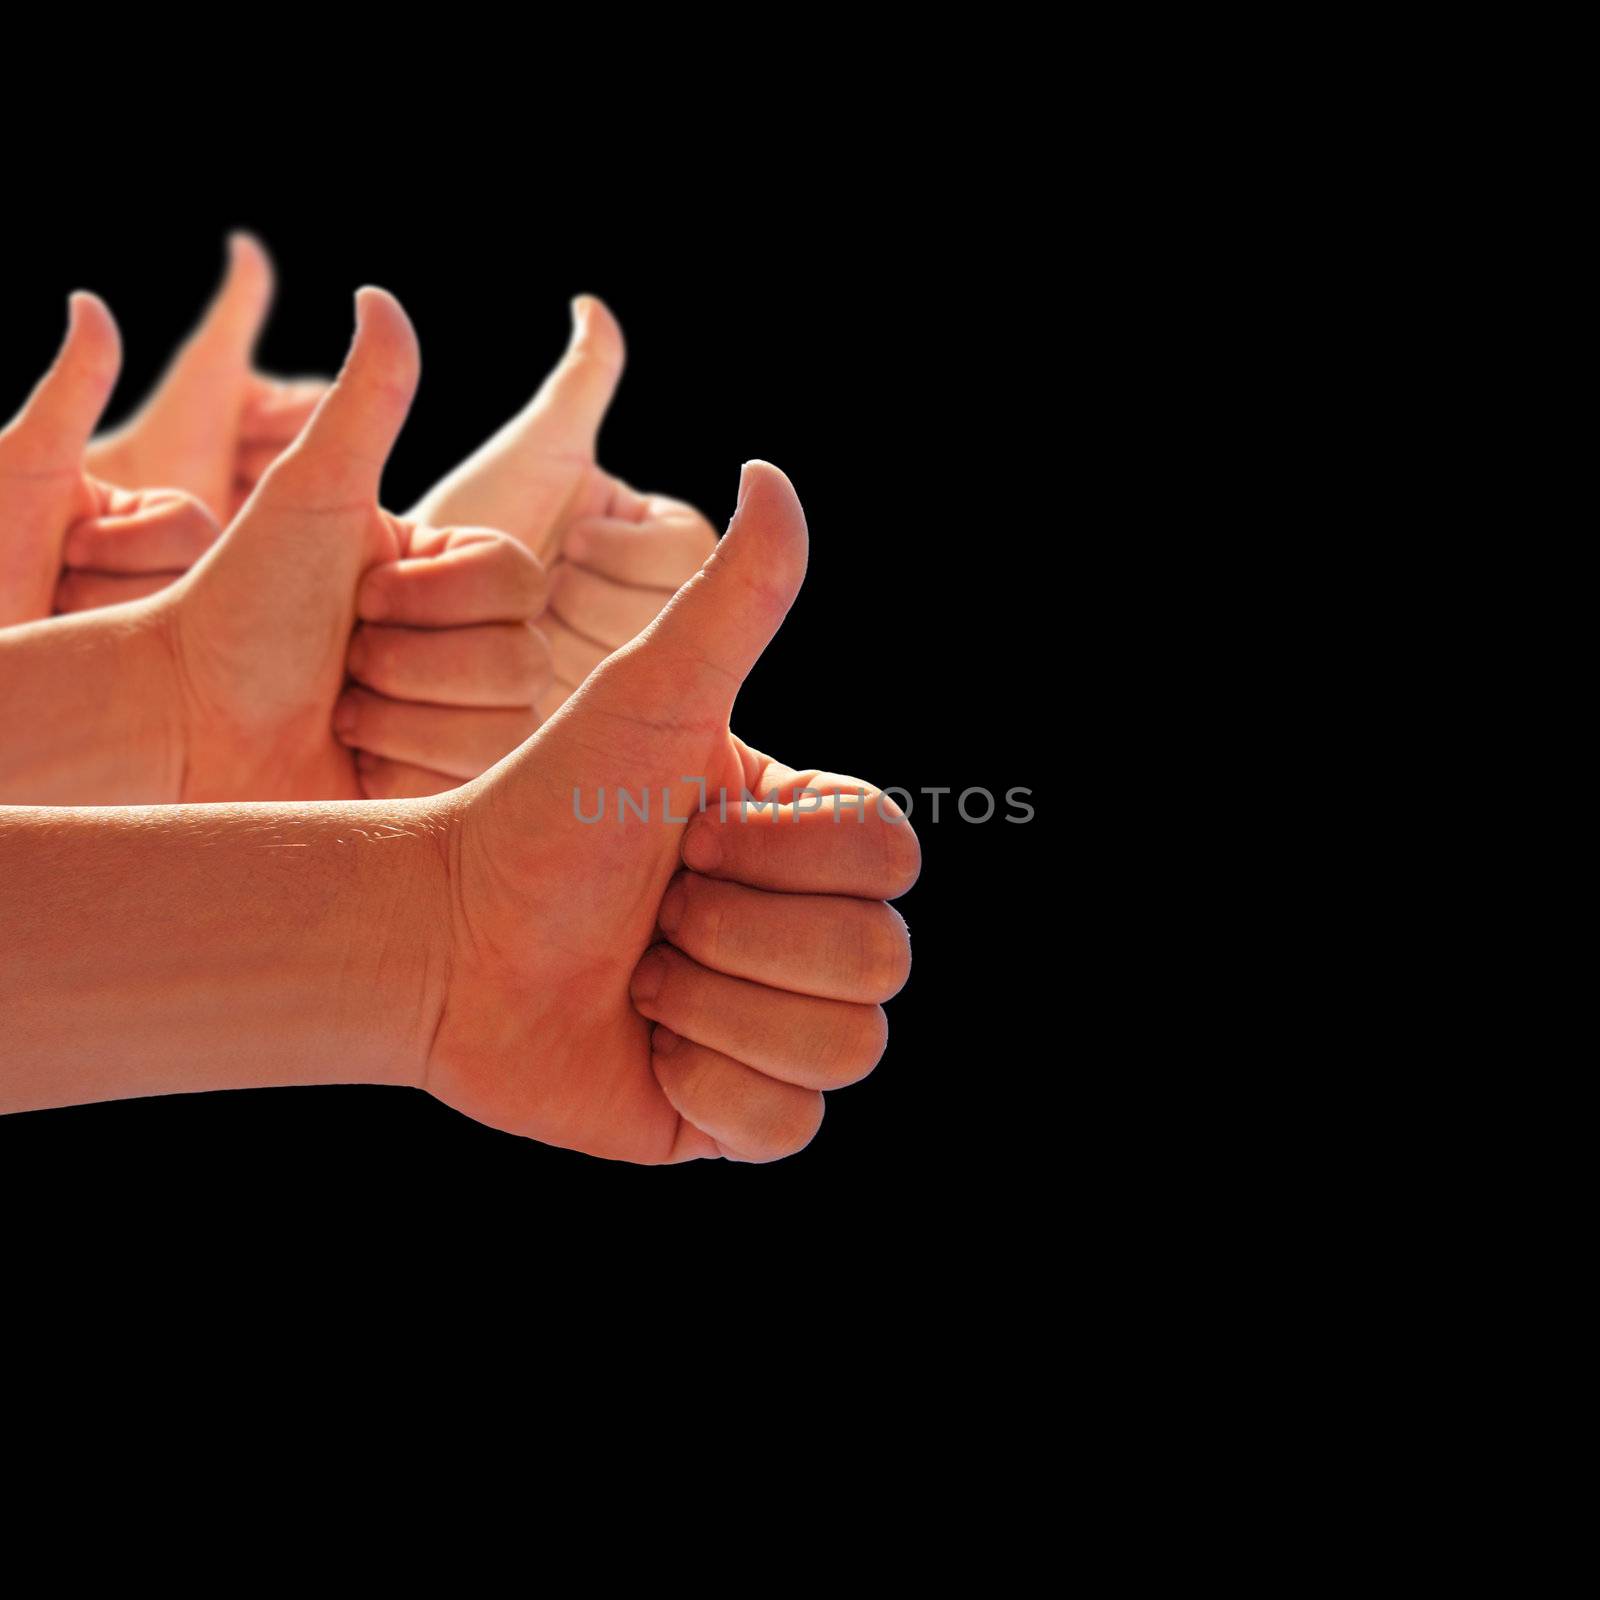 thumbs up on a black background by photochecker